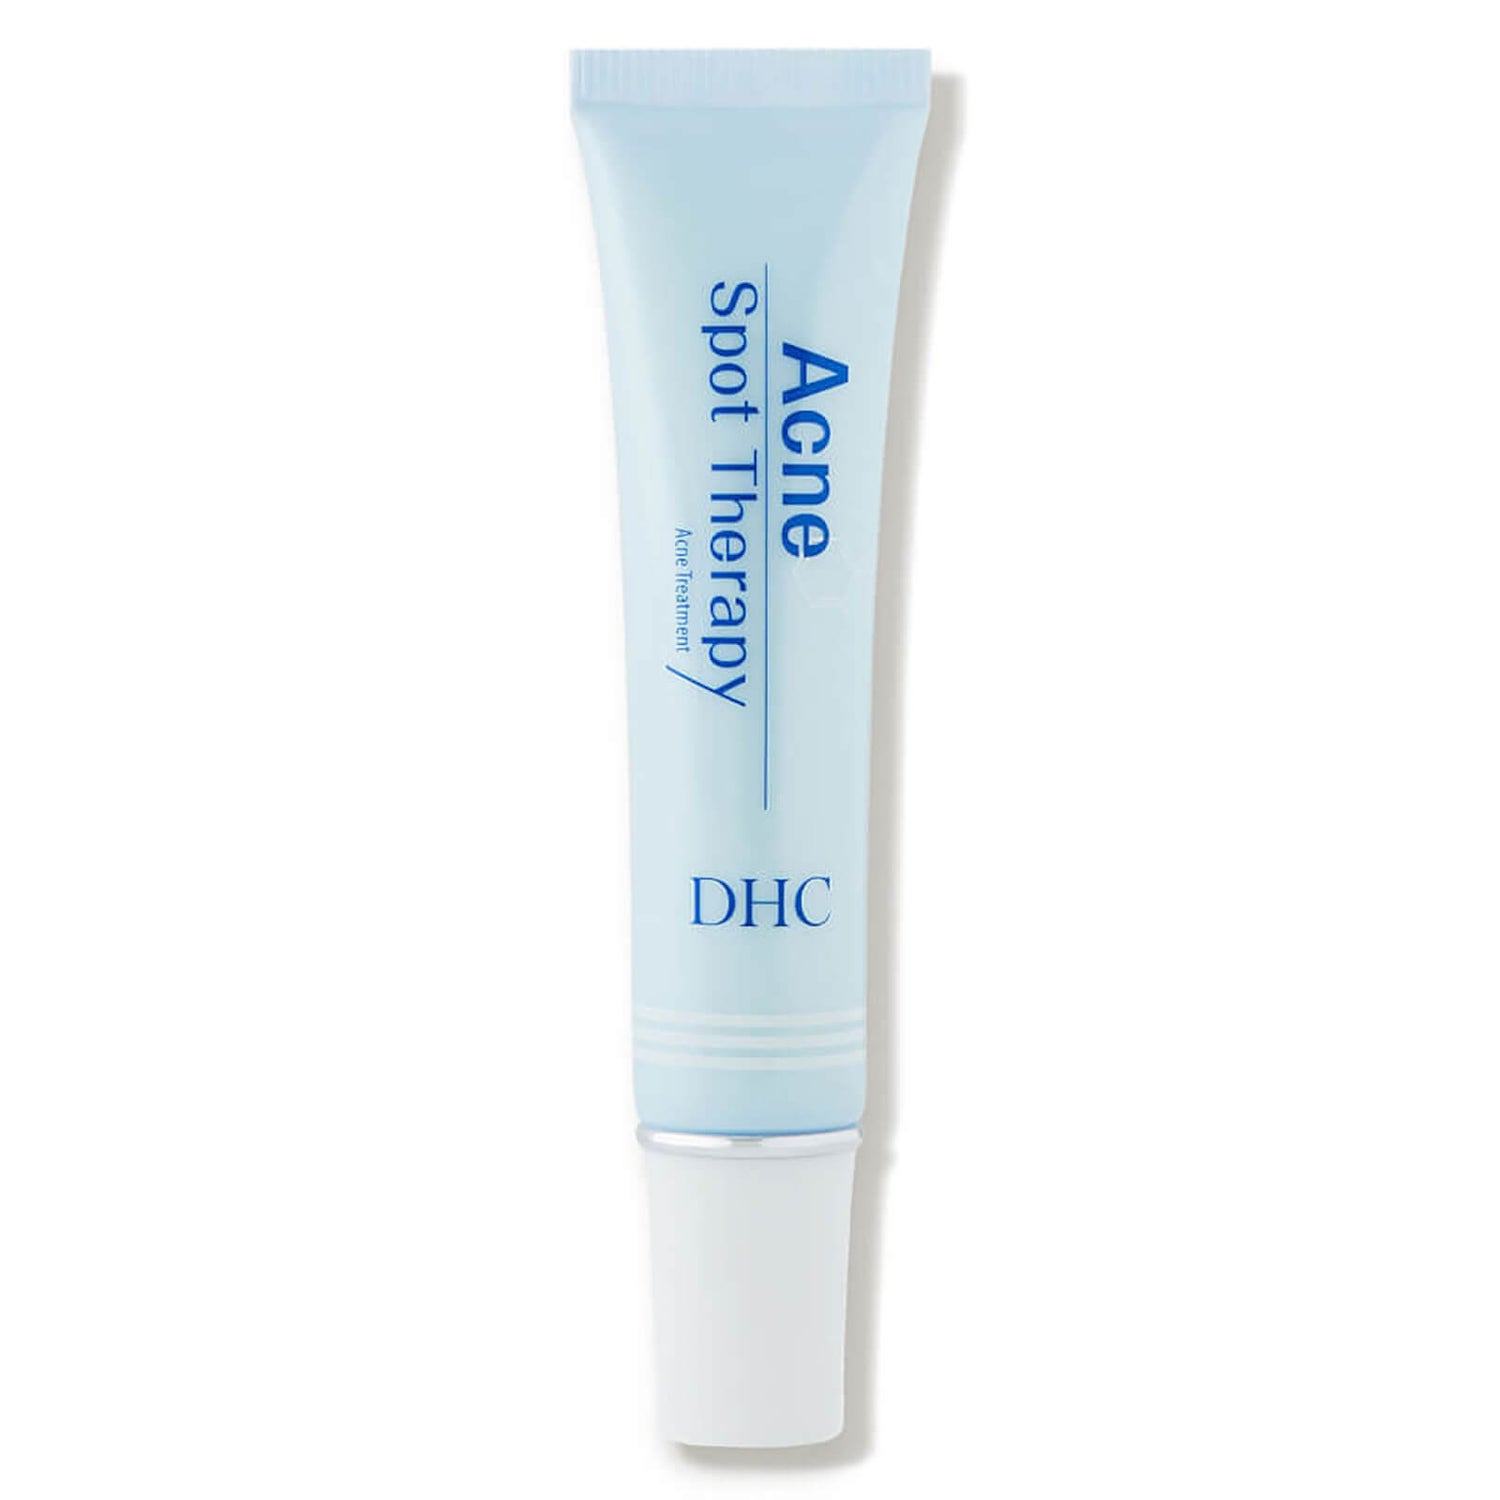 DHC Acne Spot Therapy 0.52 oz.